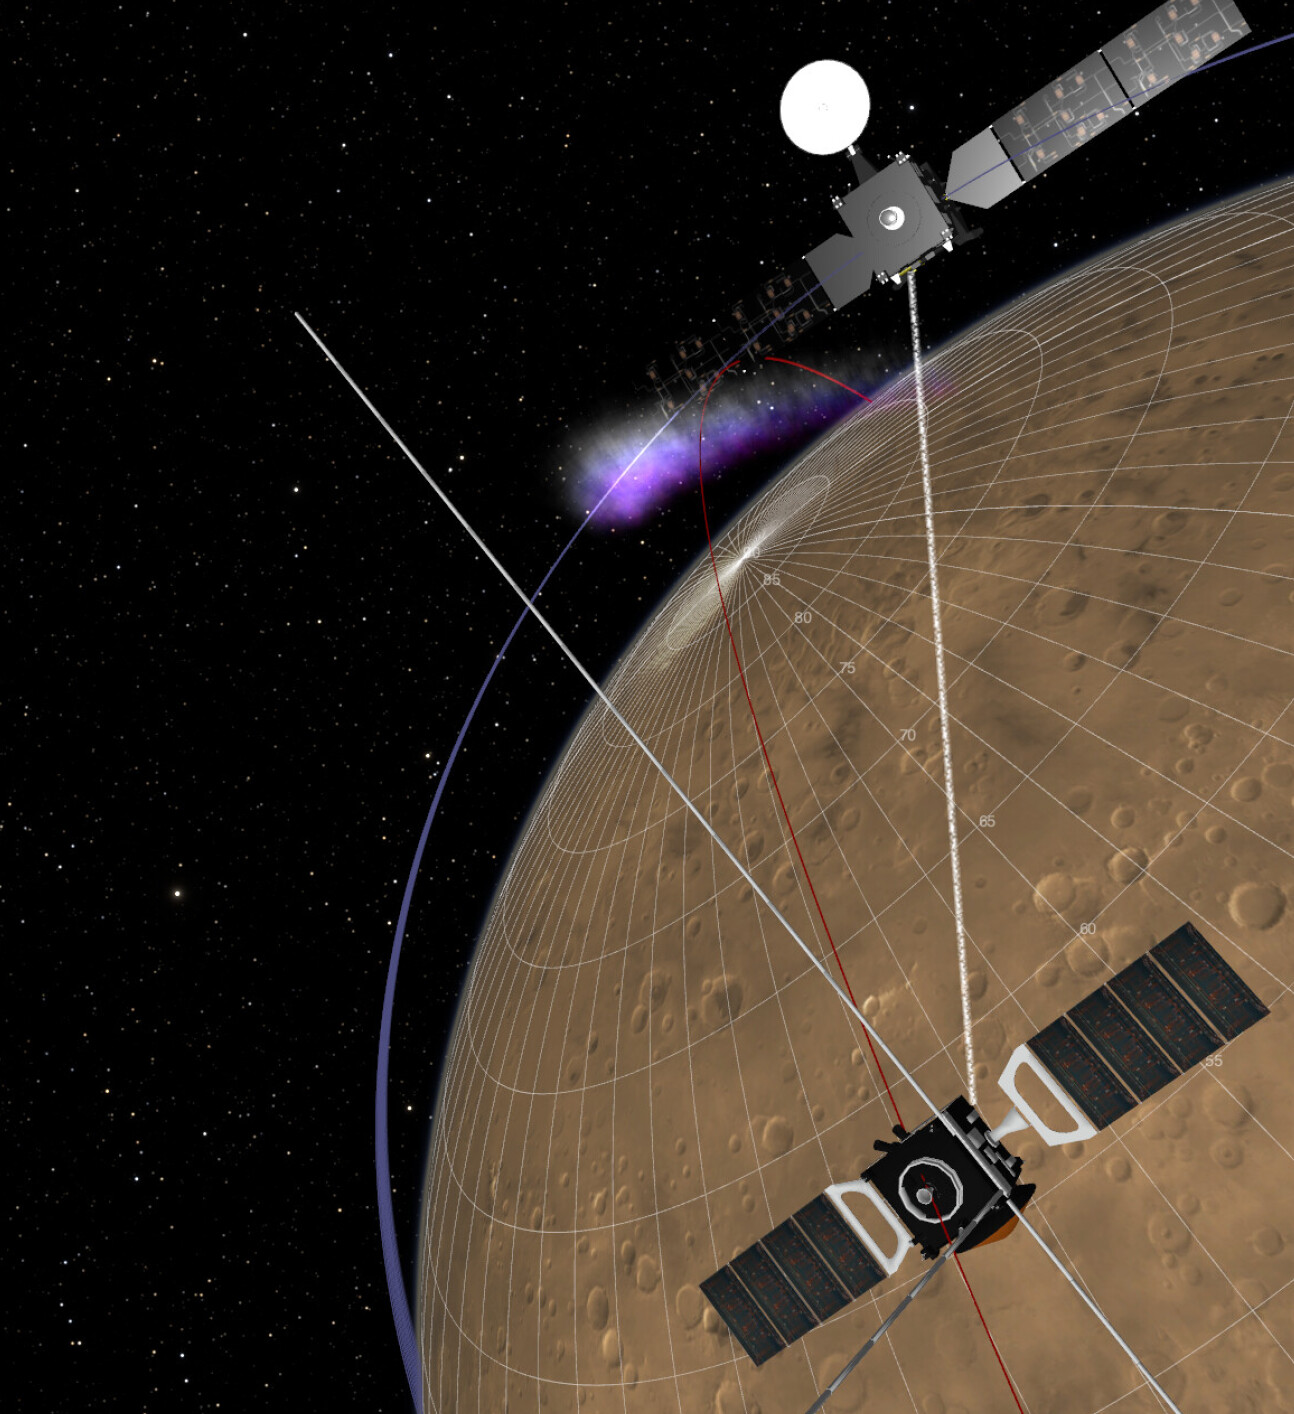 Illustration of two spacecraft above Mars, with lines between them